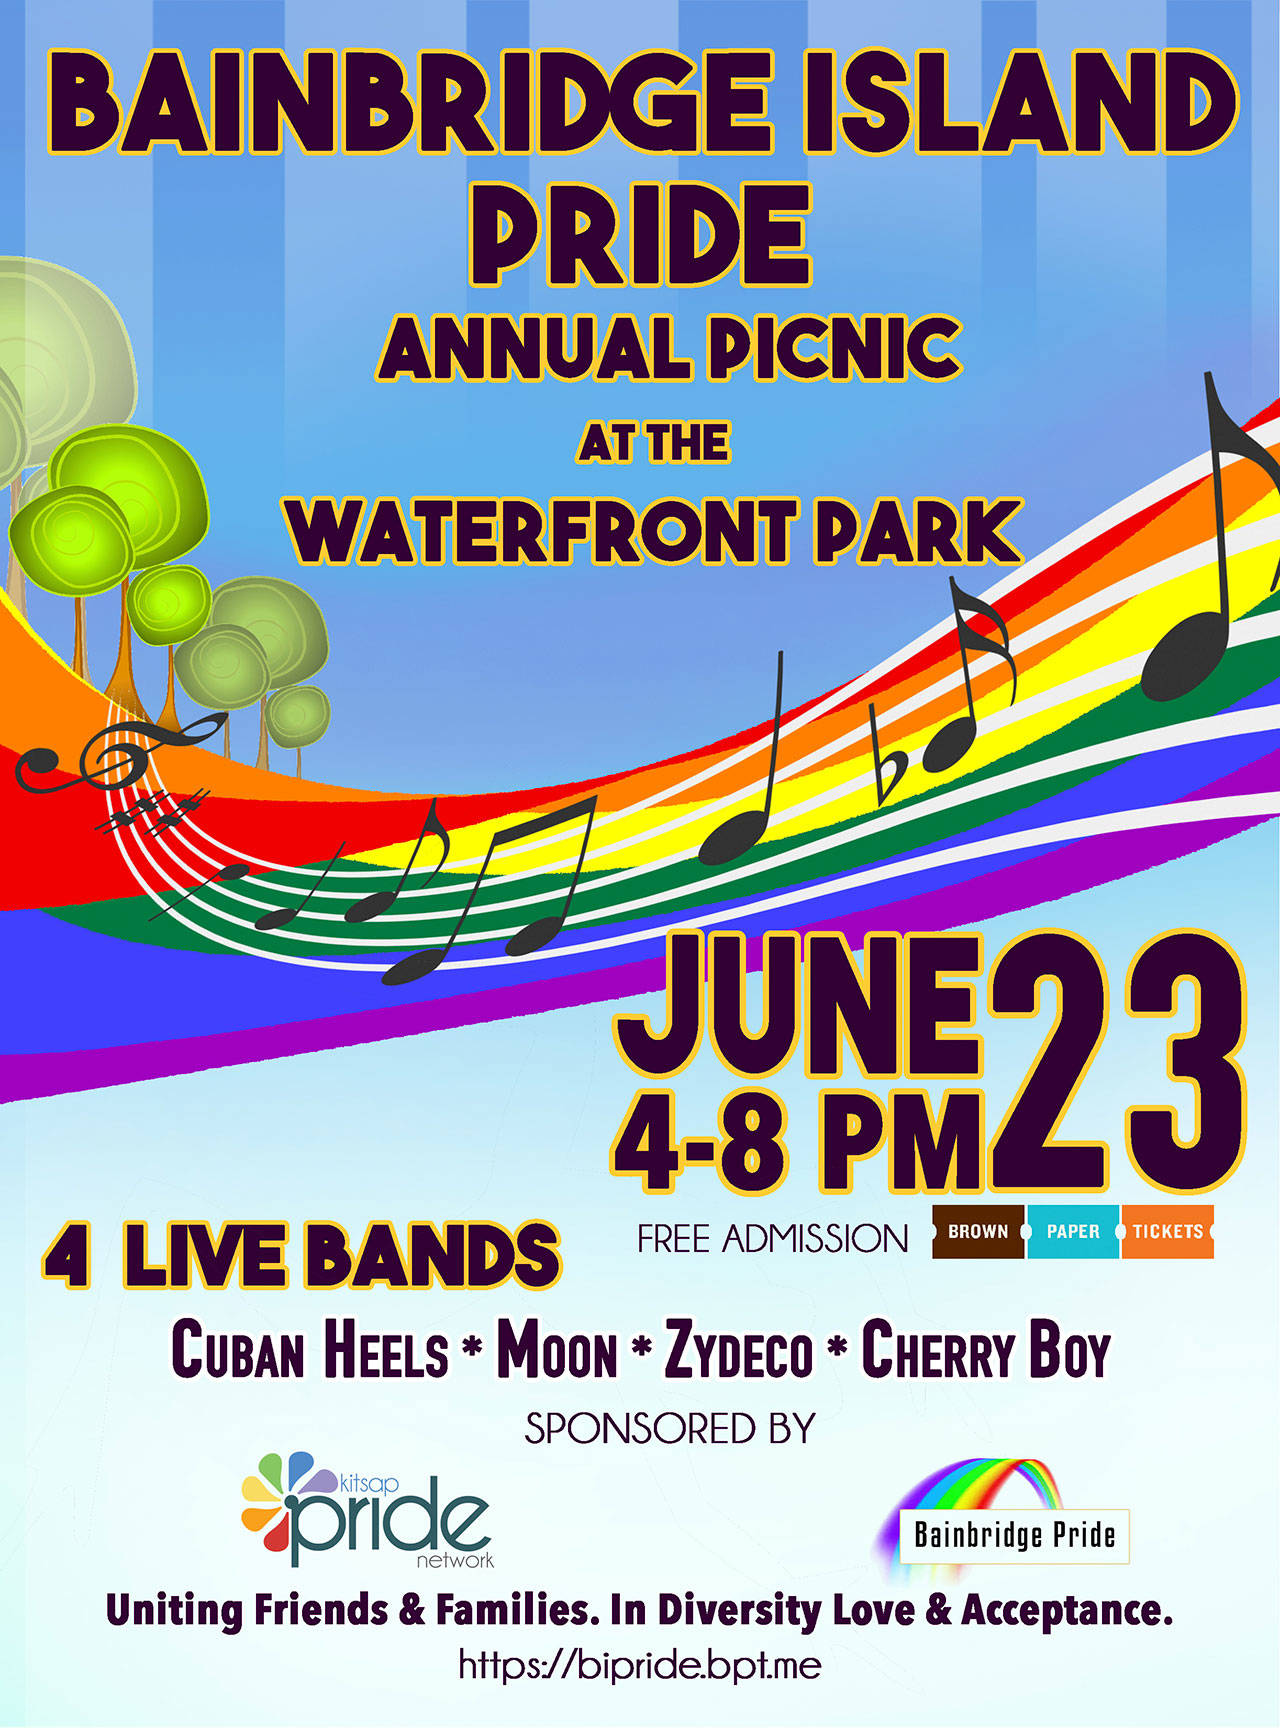 Image courtesy of Derek Villanueva | Bainbridge Pride, in conjunction with Kitsap Pride Network, will host a public picnic and concert at Waterfront Park in downtown Winslow from 4 to 8 p.m. Saturday, June 23.